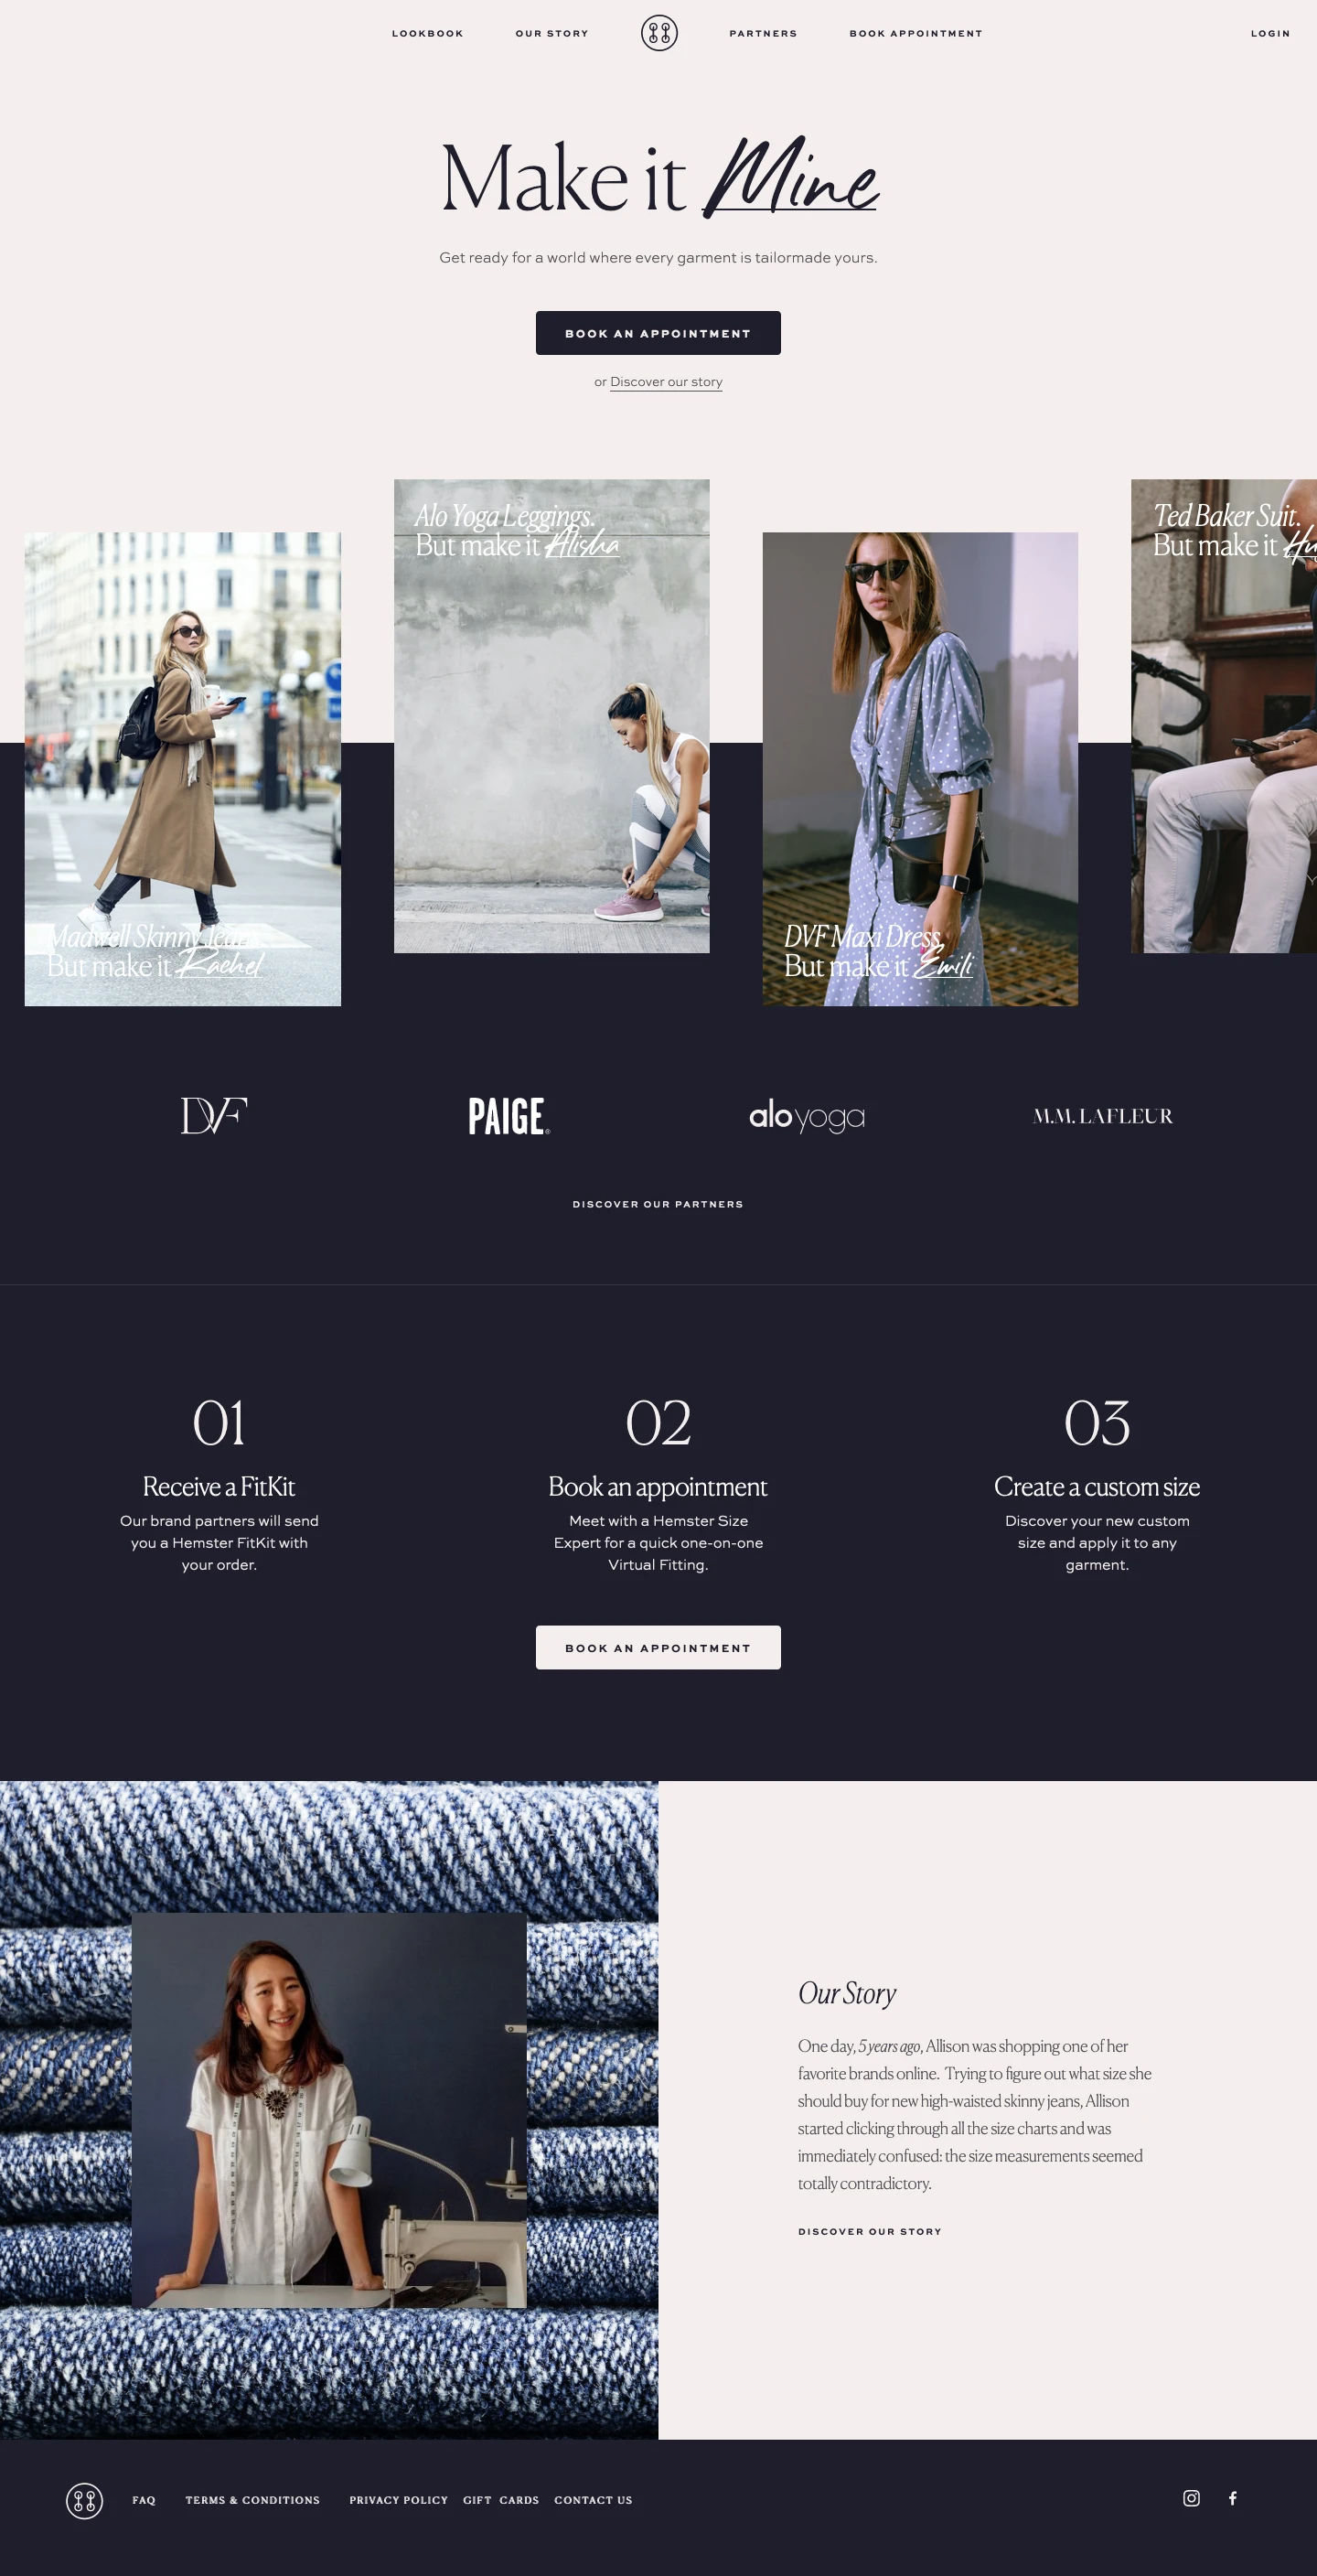 Hemster Landing Page Example: Make it mine. Get ready for a world where every garment is tailormade yours.